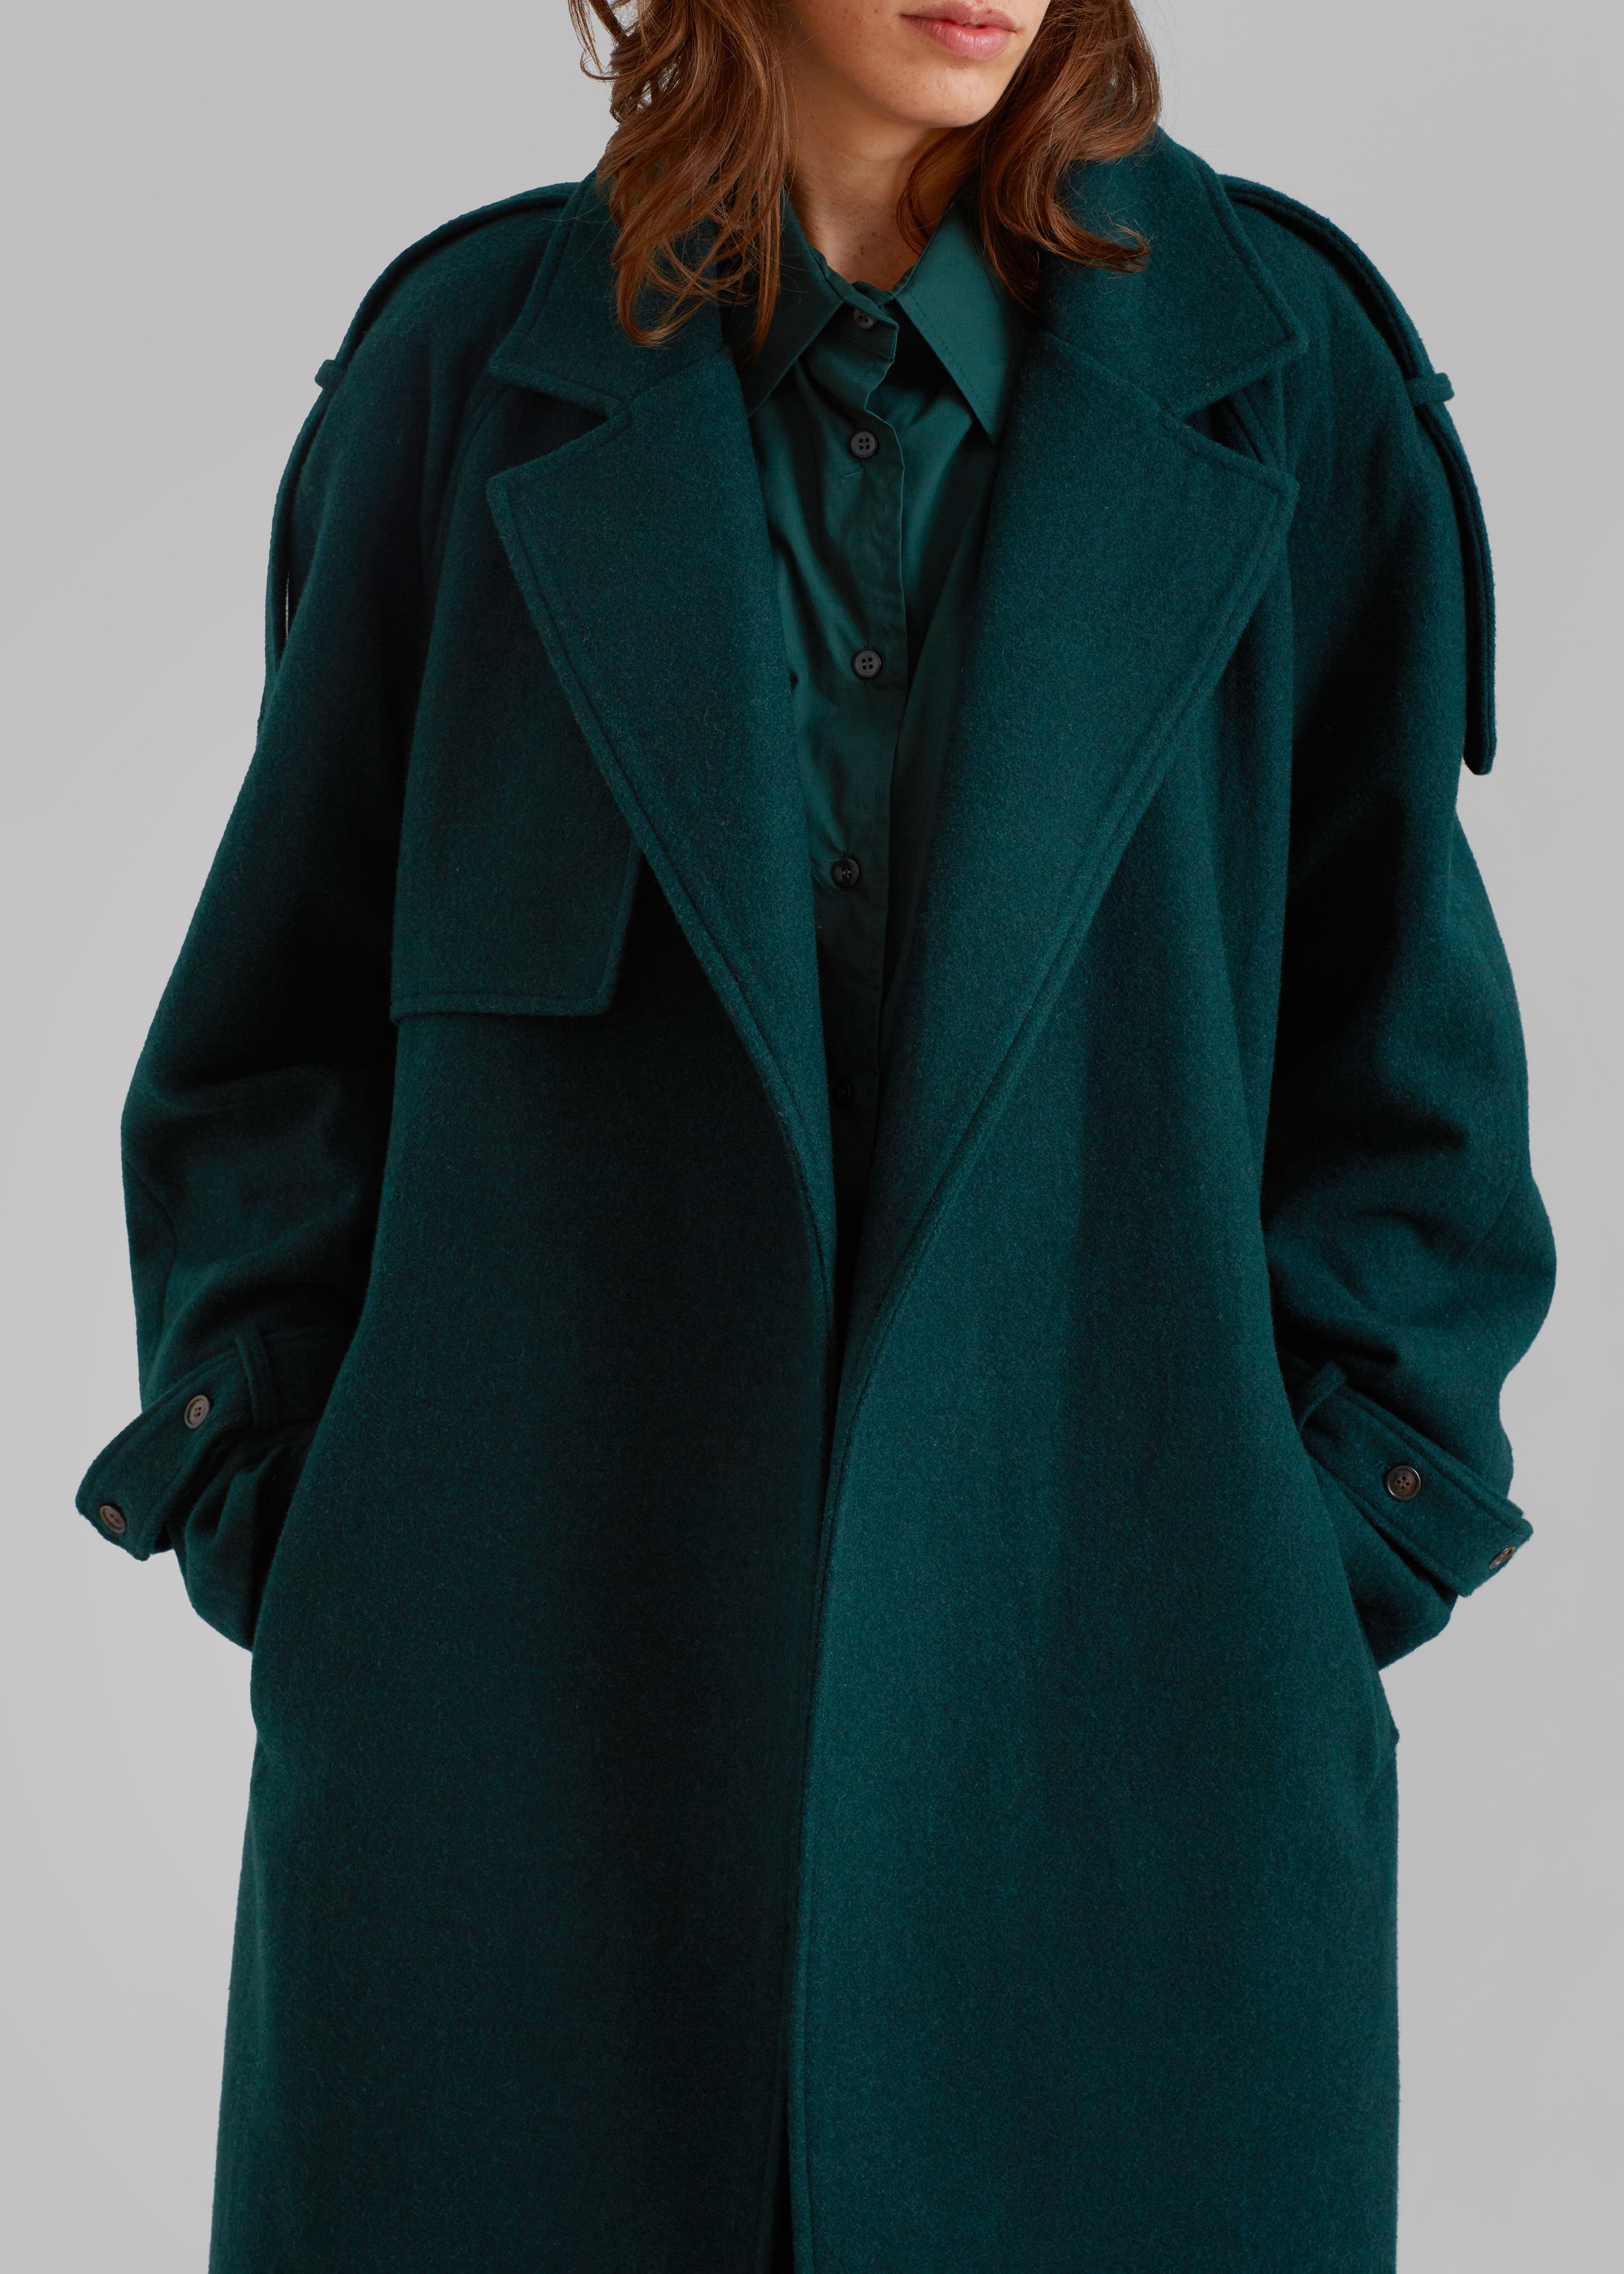 Suzanne Wool Trench Coat - Bottle Green - 11